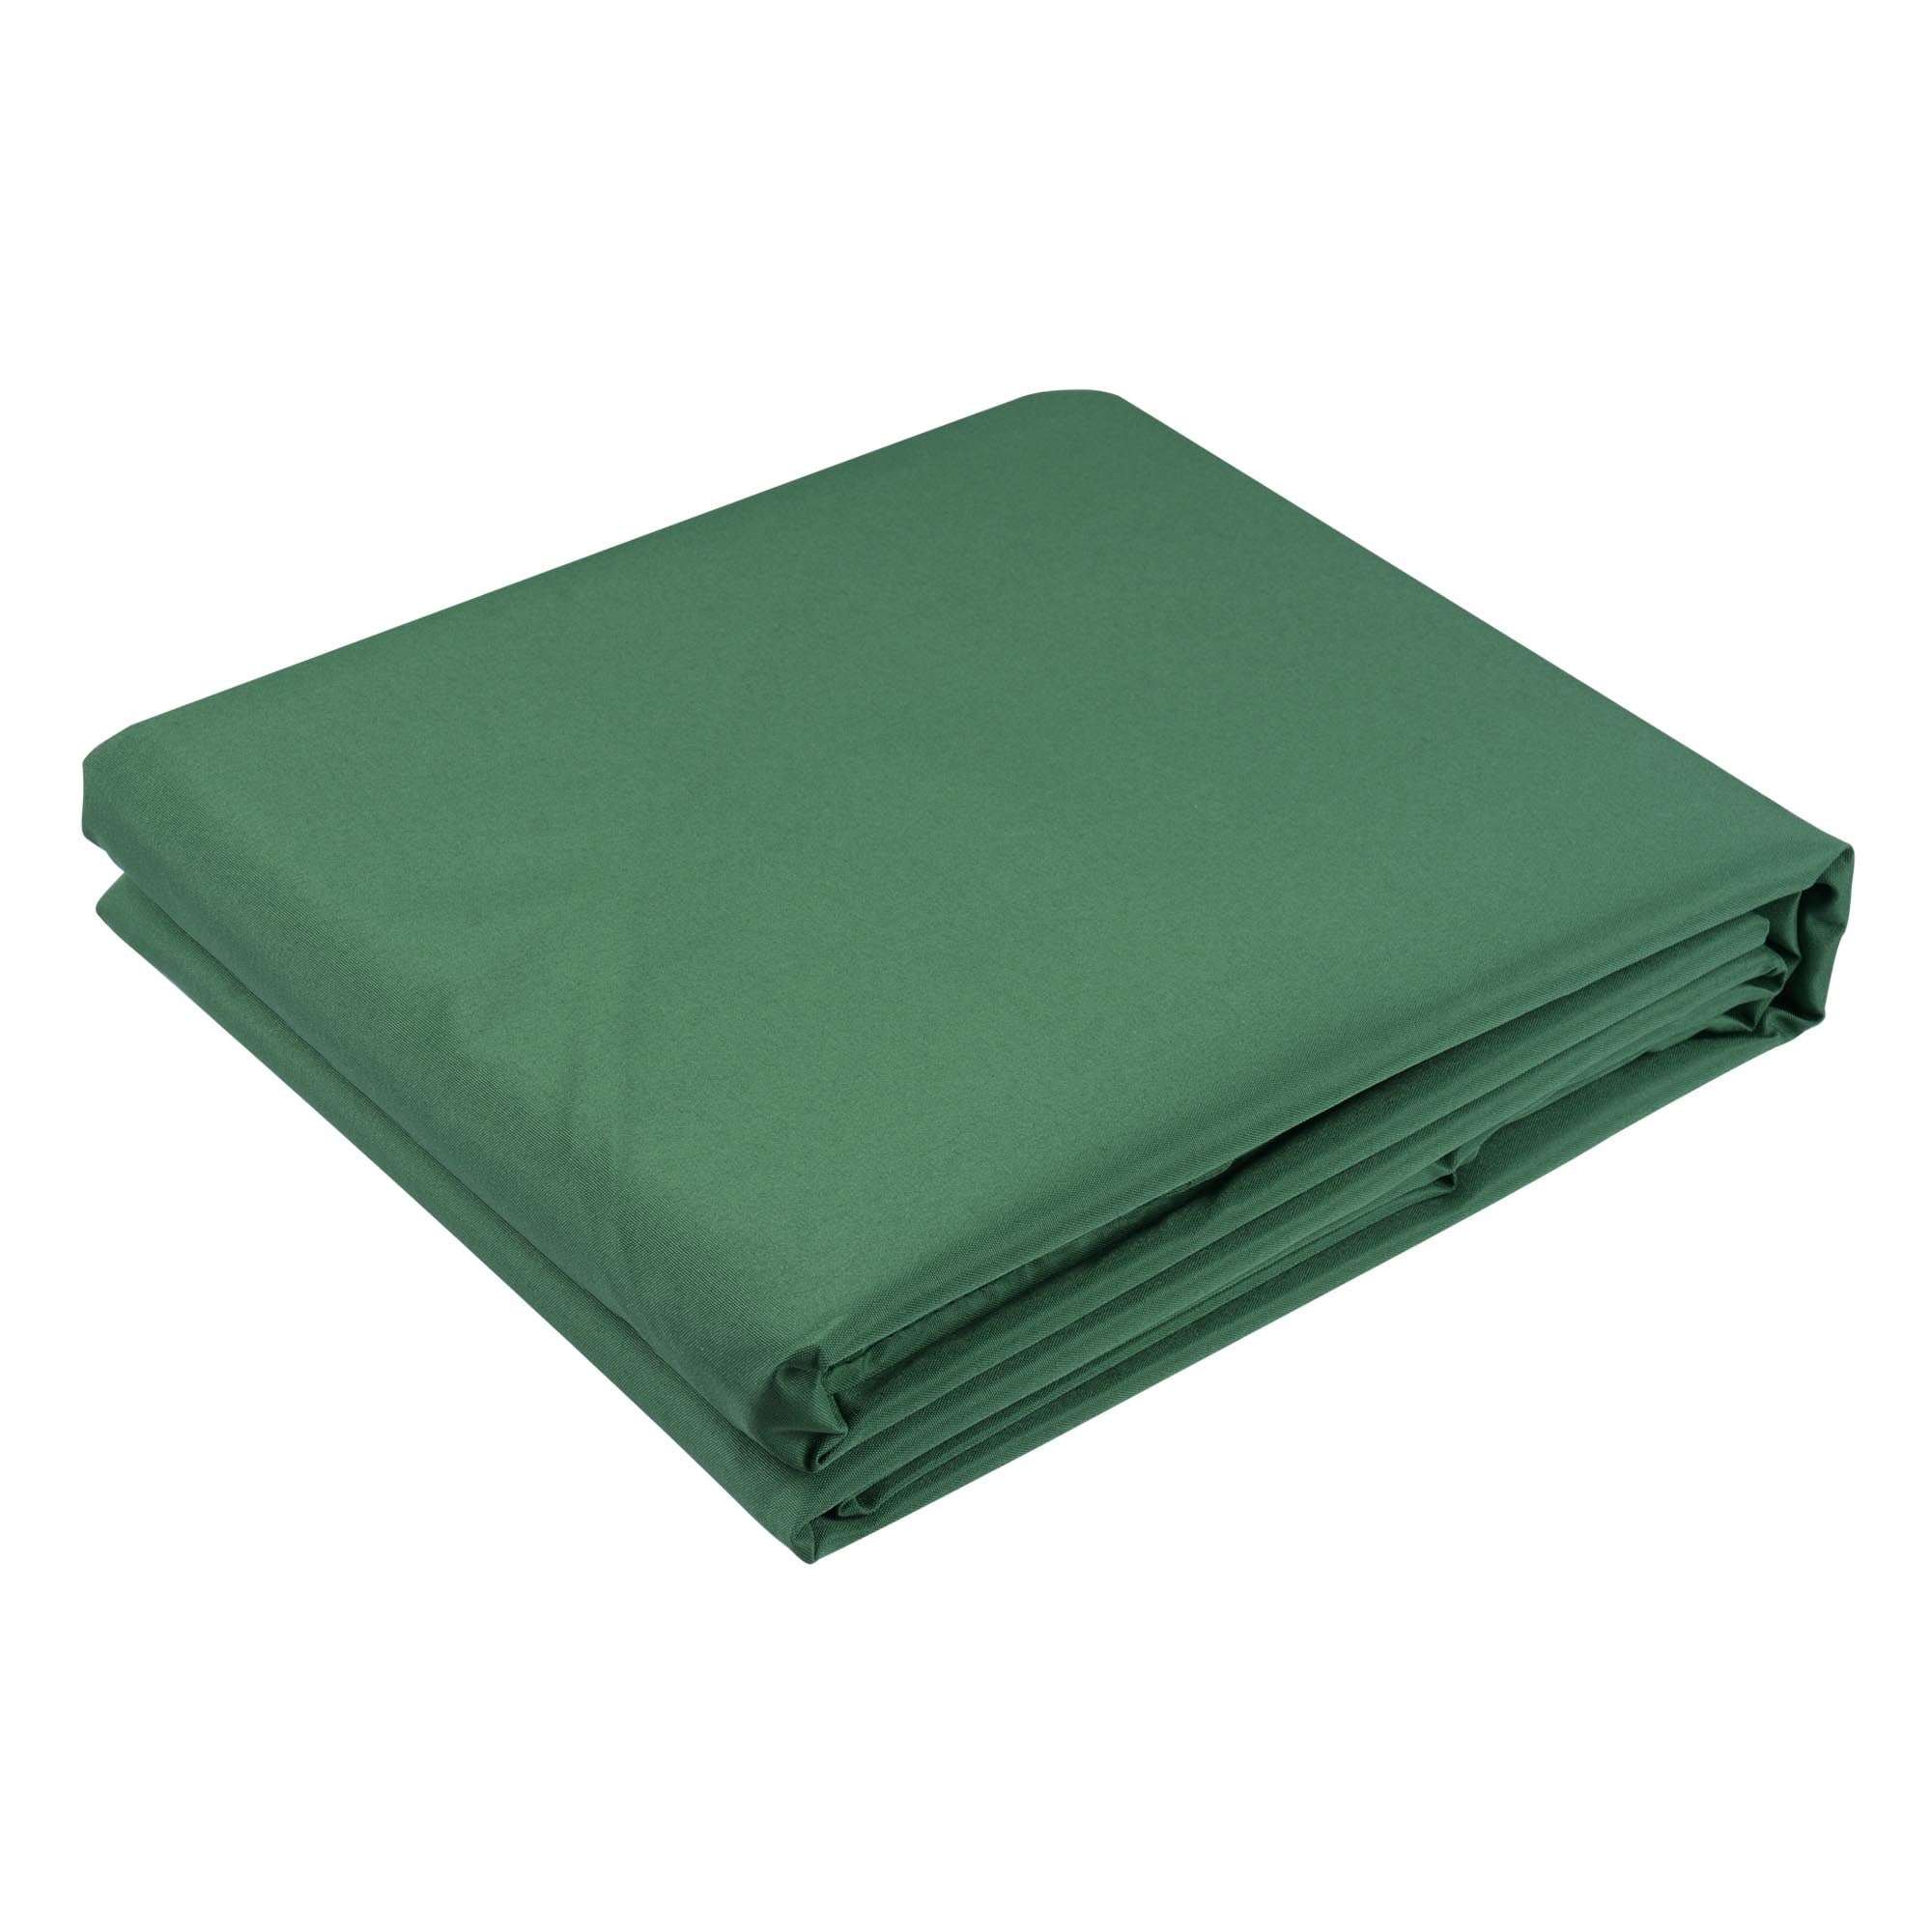 17×6.5Ft Pergola Canopy Replacement Cover Green